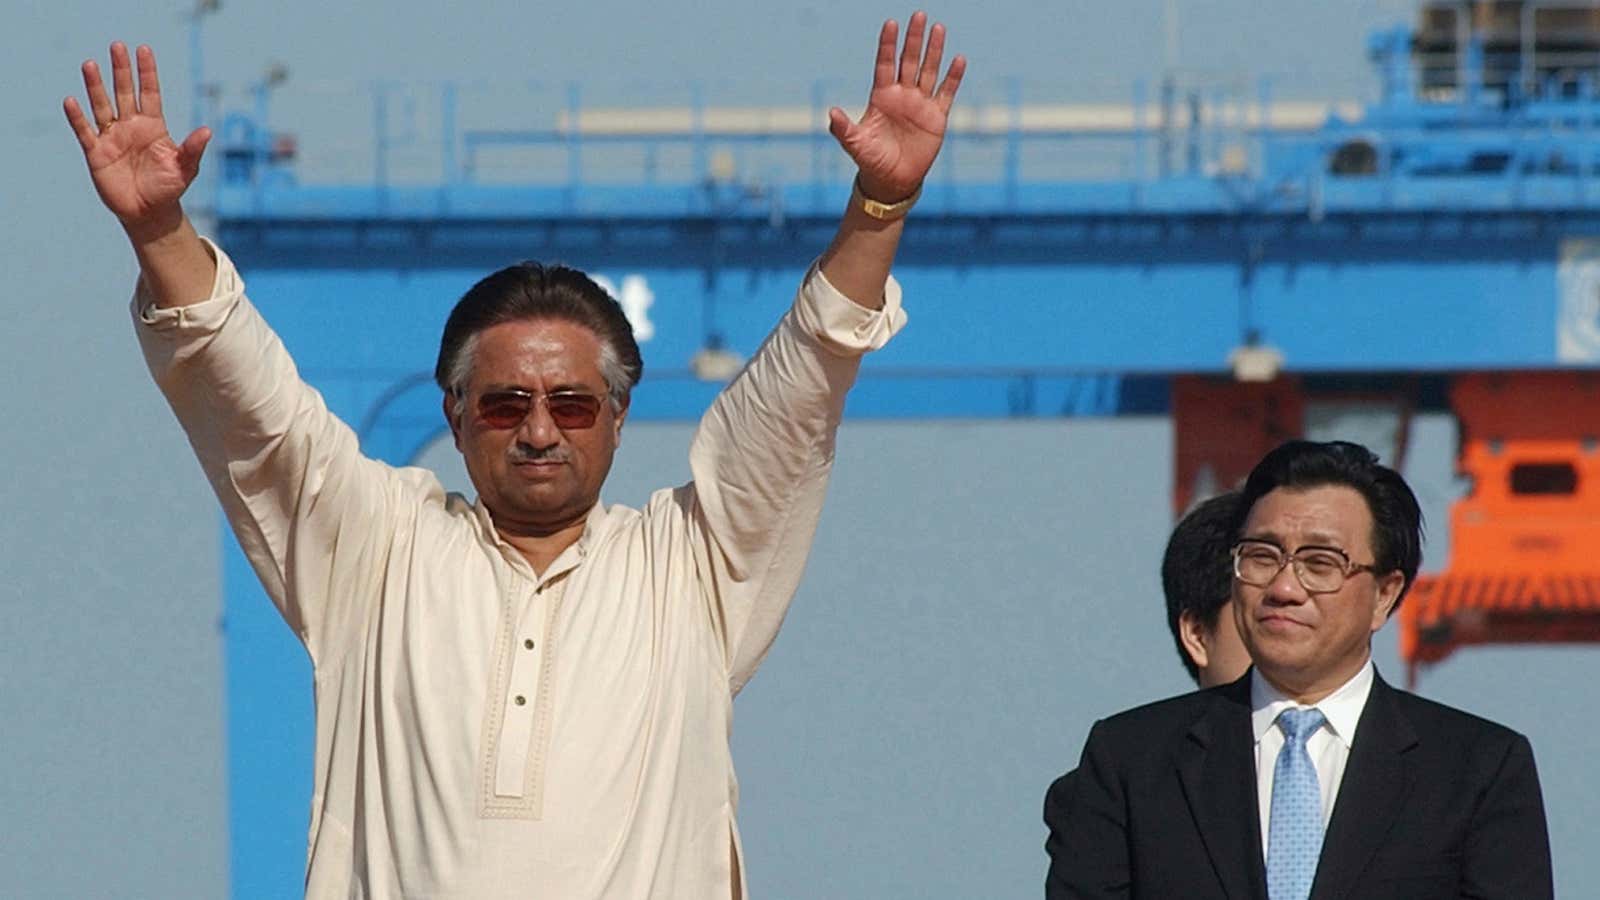 China’s communication minister stands quietly in the background while former Pakistani president Musharraf celebrates the opening of Gwardar Port.